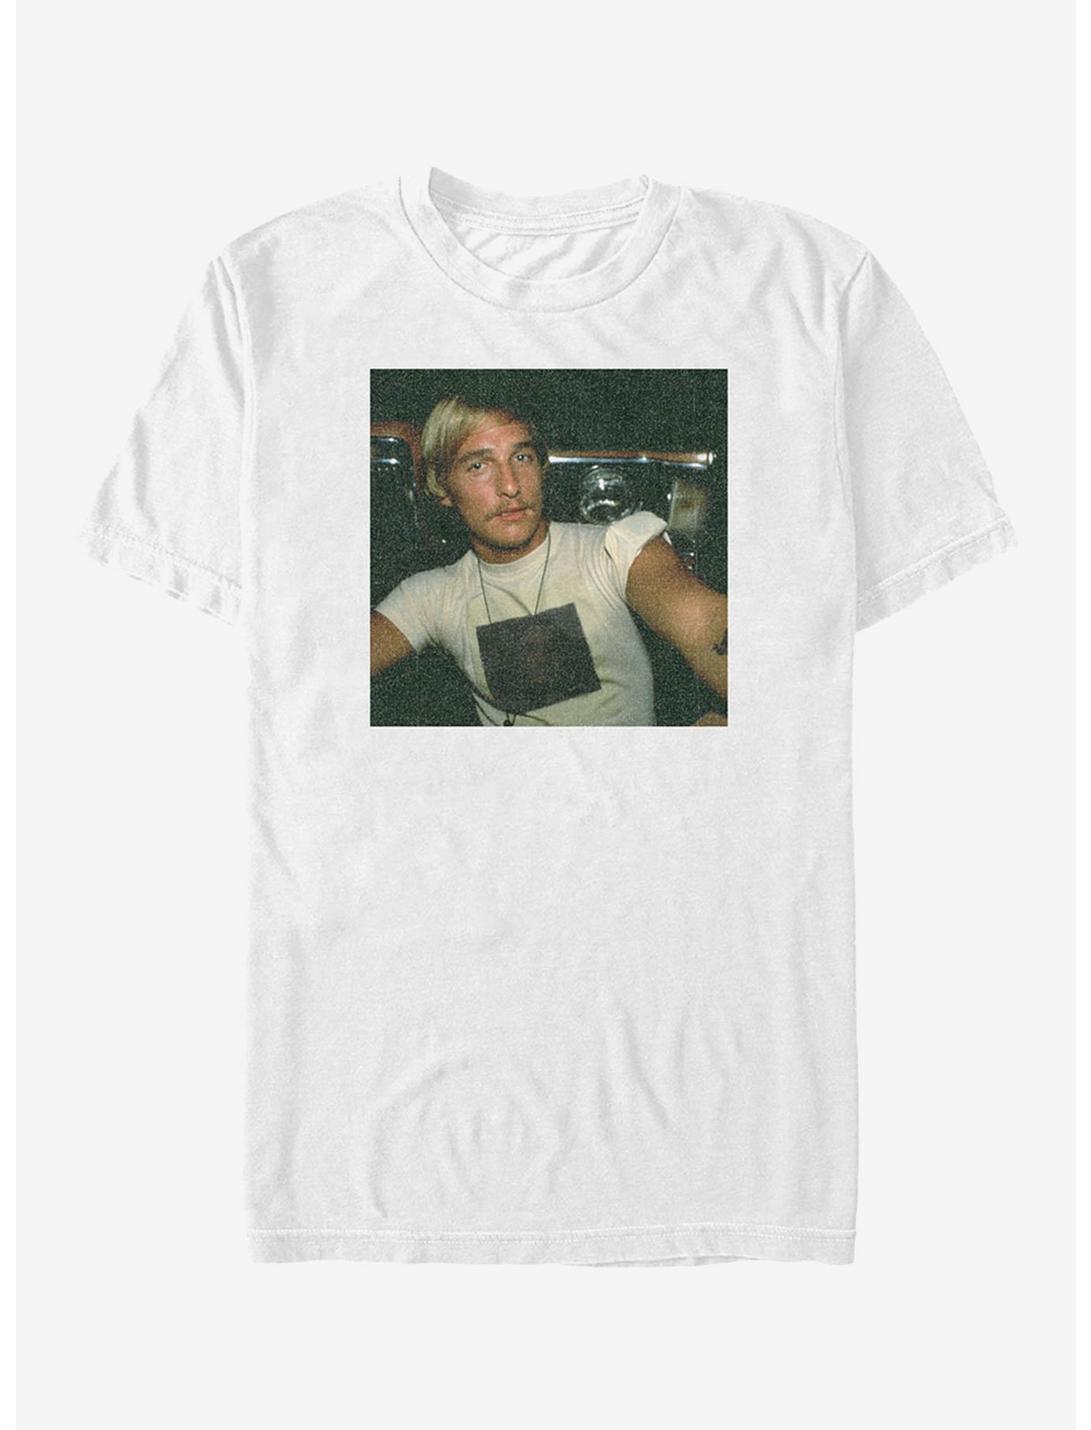 Dazed and Confused Ultimate Party Boy T-Shirt, WHITE, hi-res